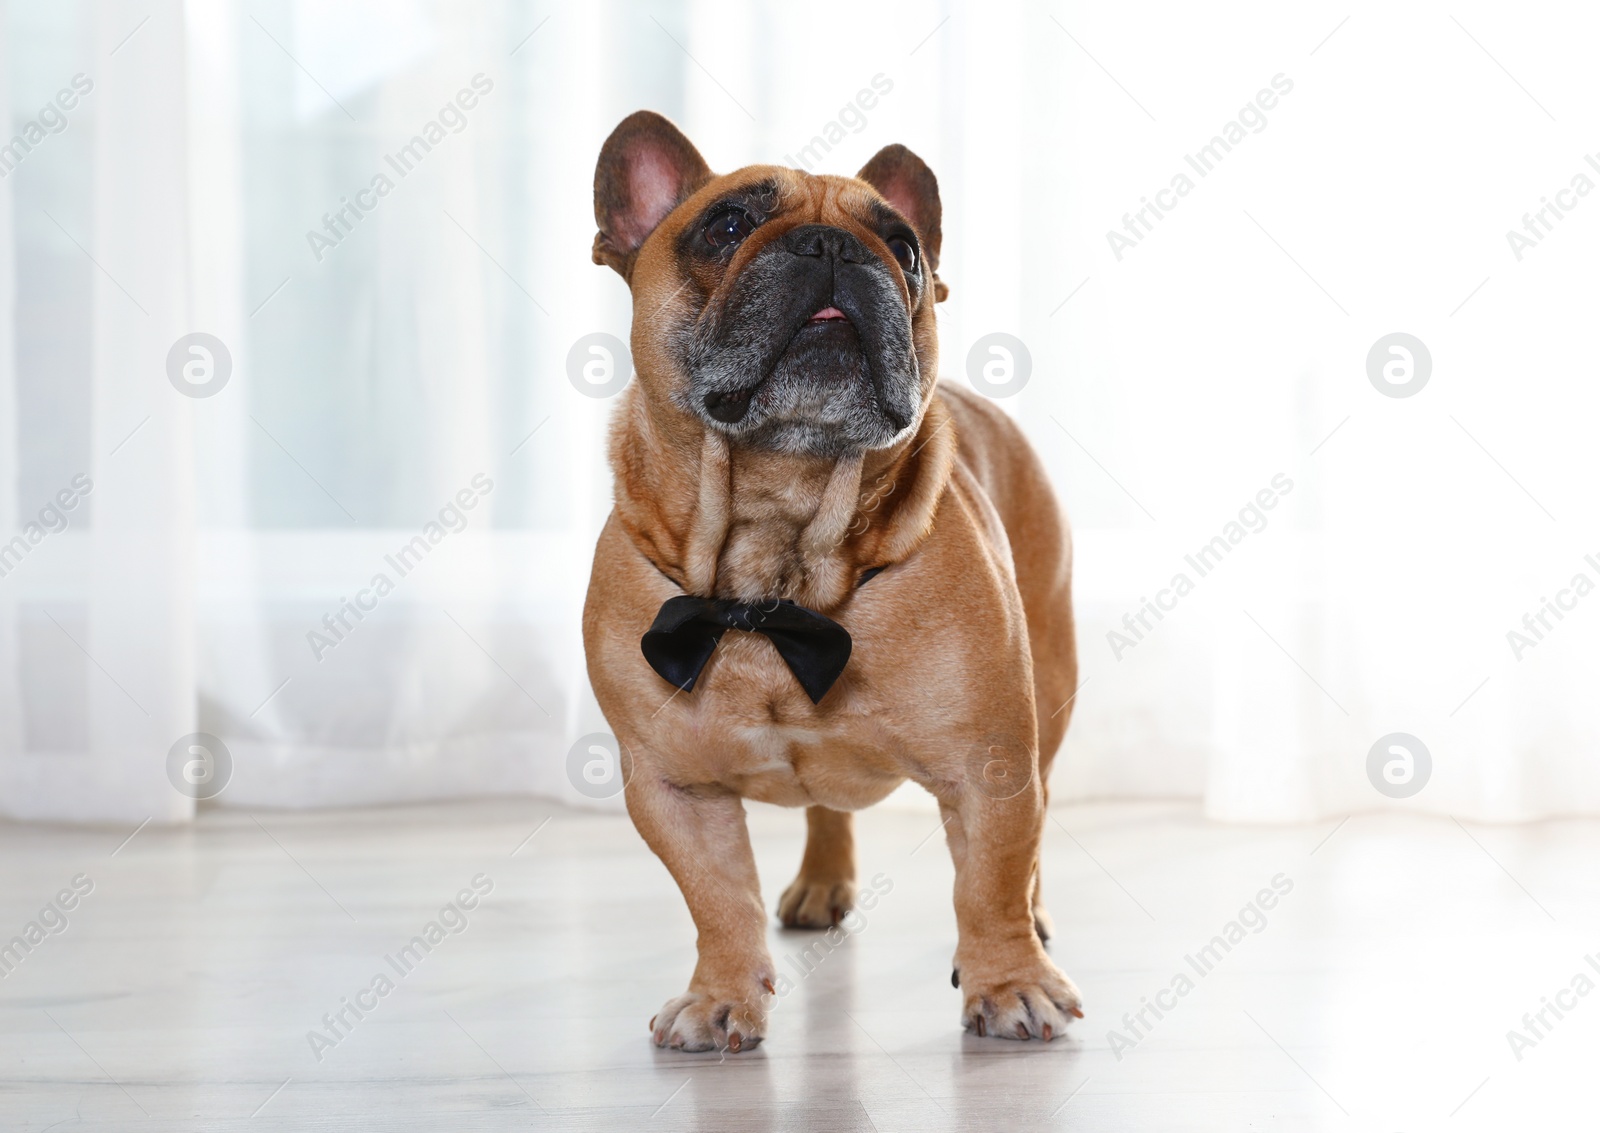 Photo of Funny French bulldog in bow tie on floor indoors